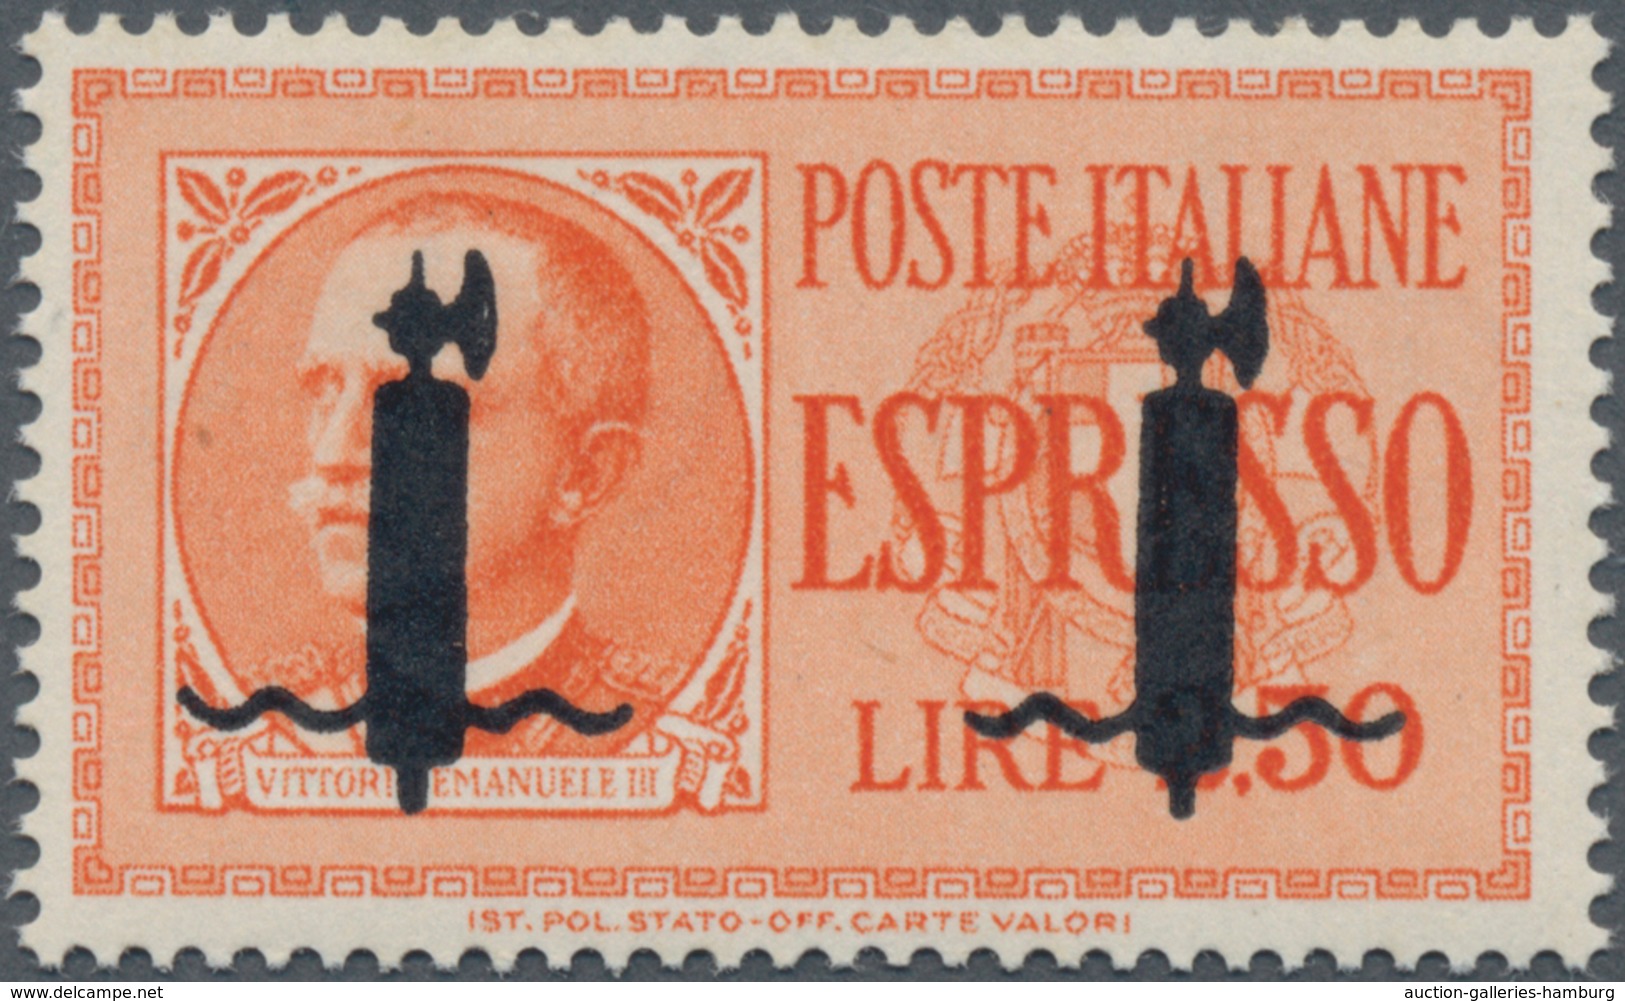 Italien: 1944, Rep.Sociale, Express Stamp 2.50l. Orange With Overprint Proof "two Impression Of Fasc - Mint/hinged